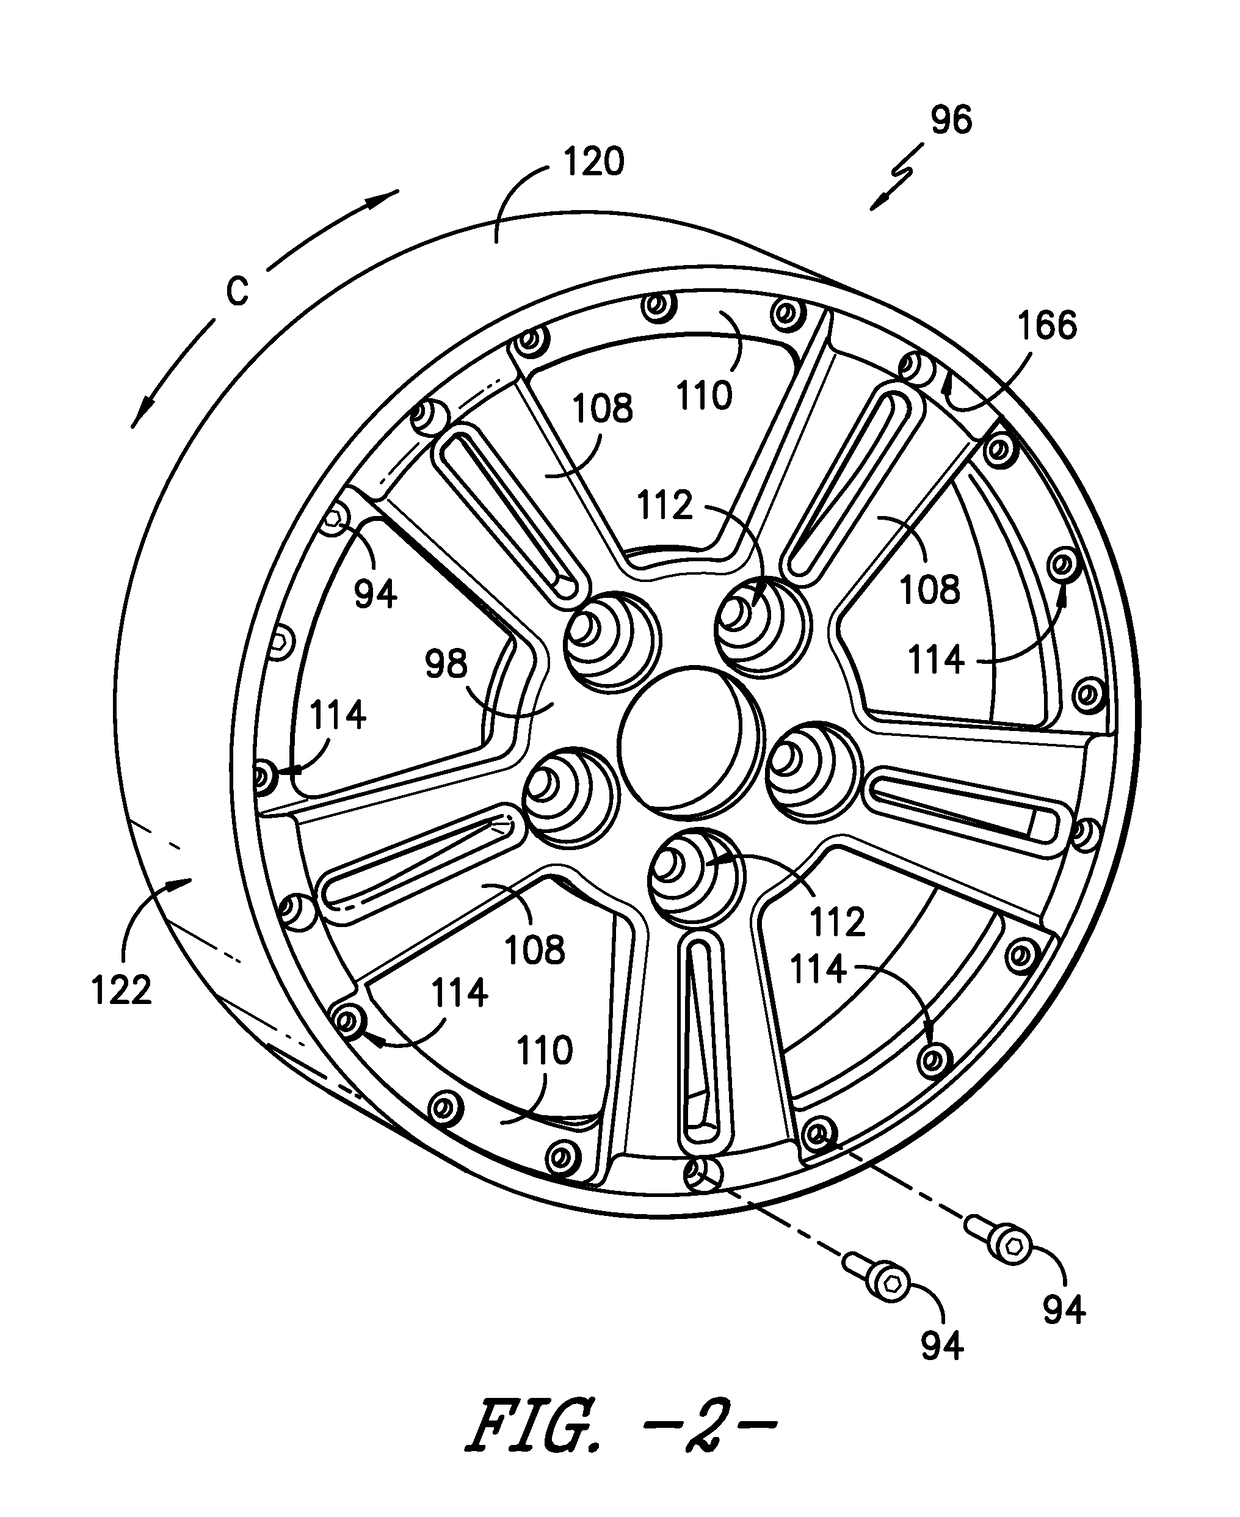 Non-pneumatic tire with integrated polymeric flexible wheel center mount